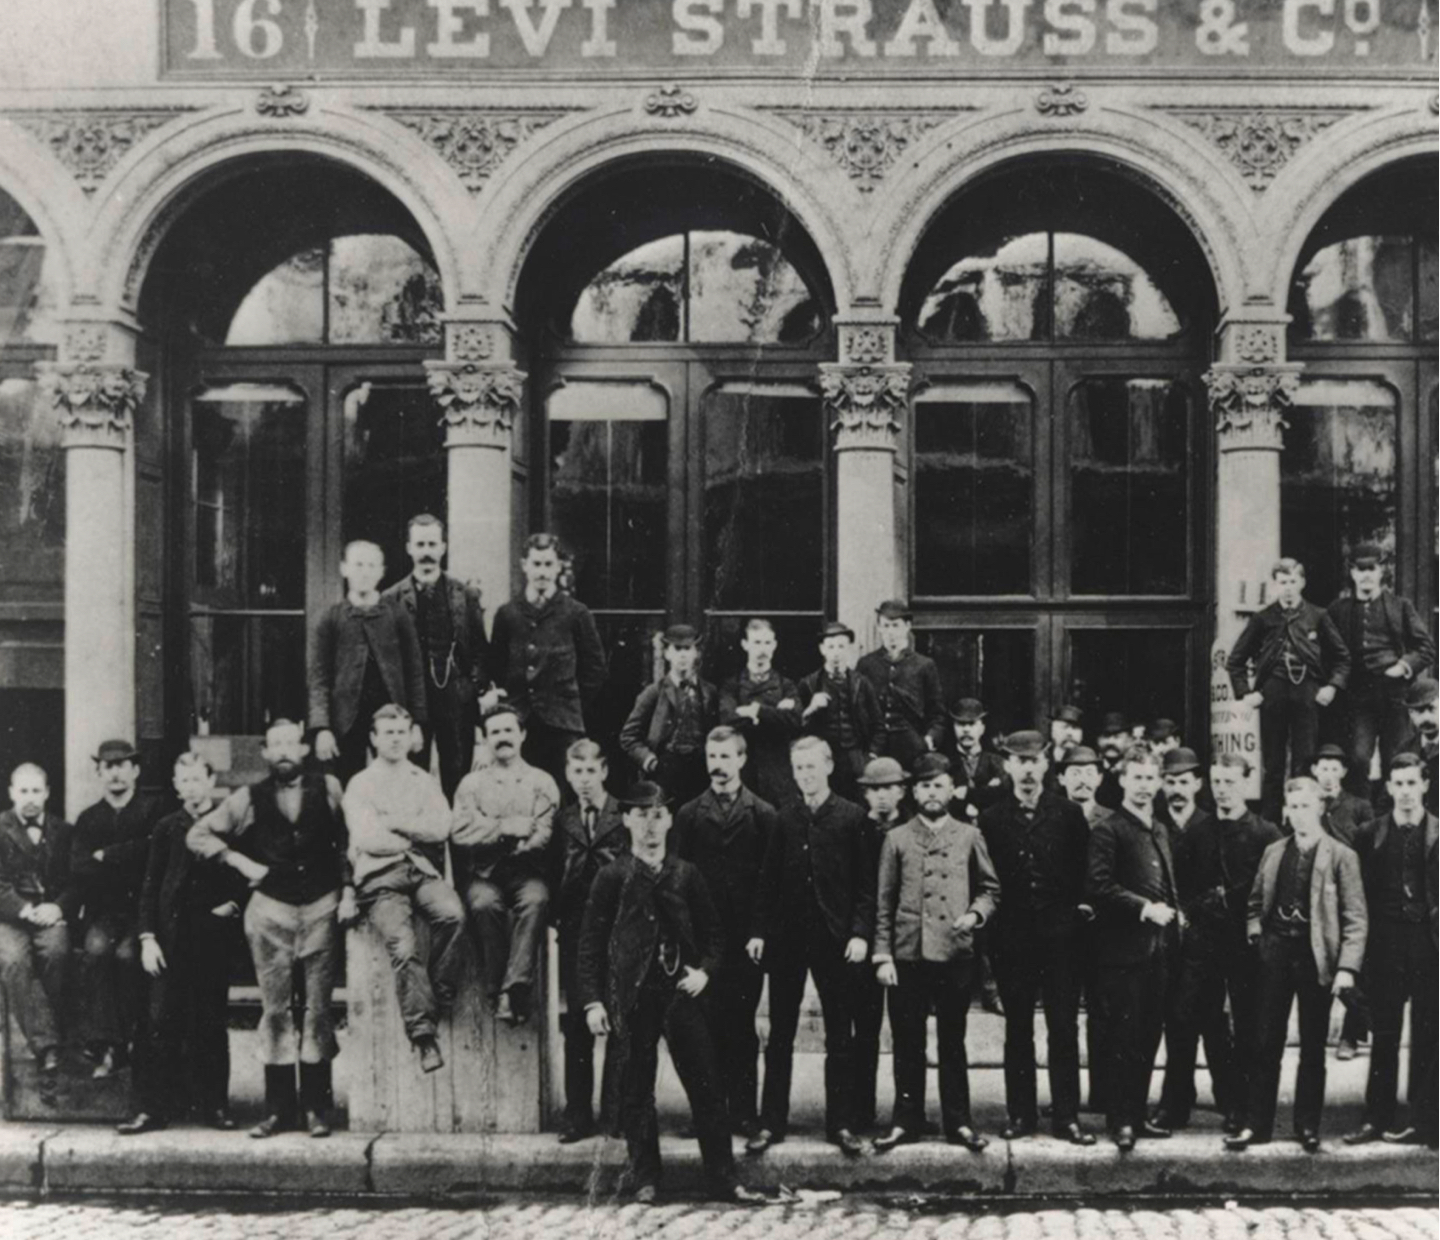 History of Levi Strauss & Co.